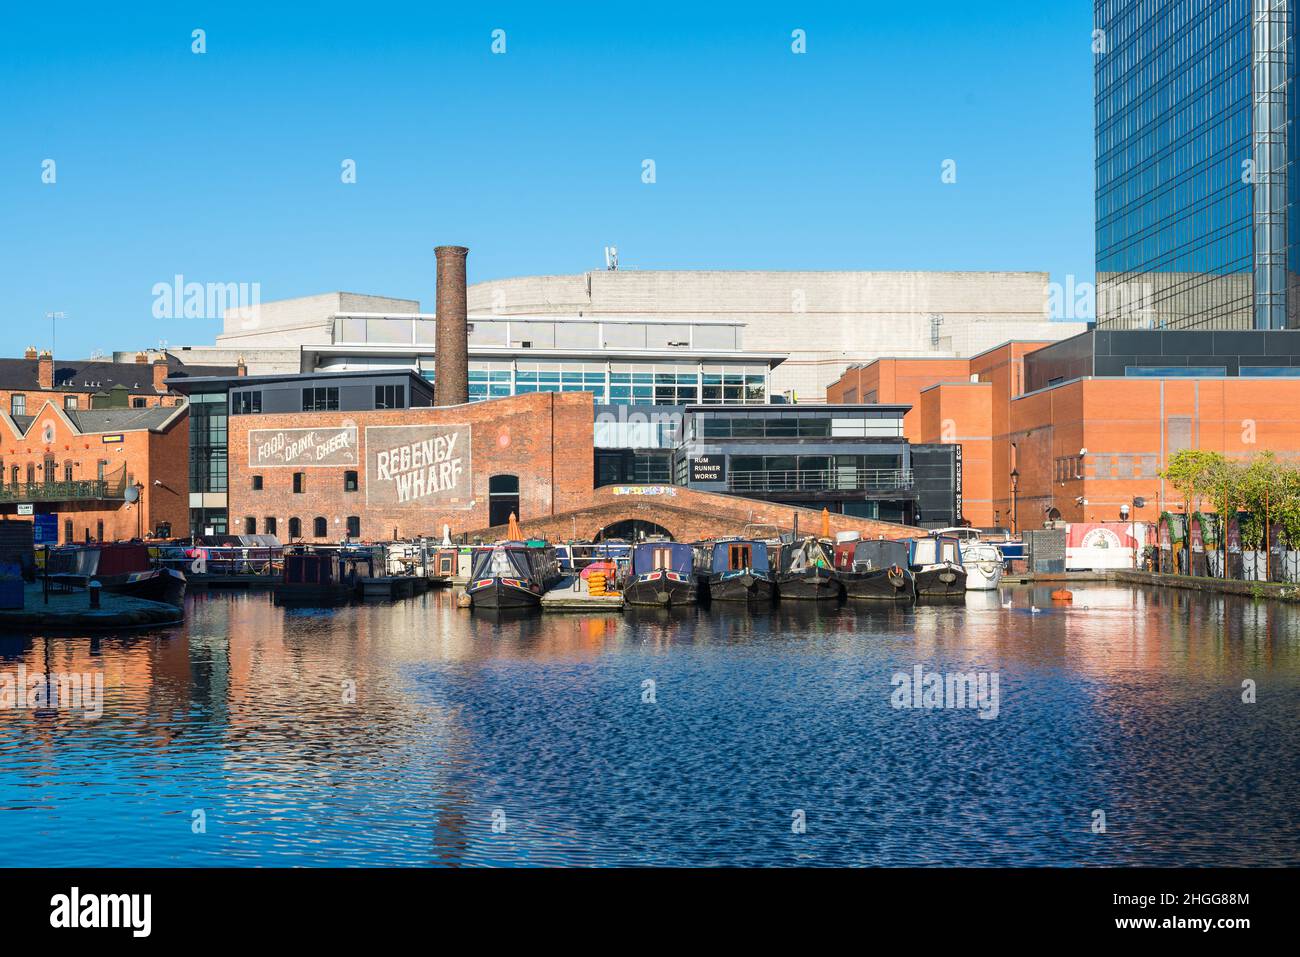 Regency wharf in Gas Street Basin in the centre of Birmingham's canal network Stock Photo